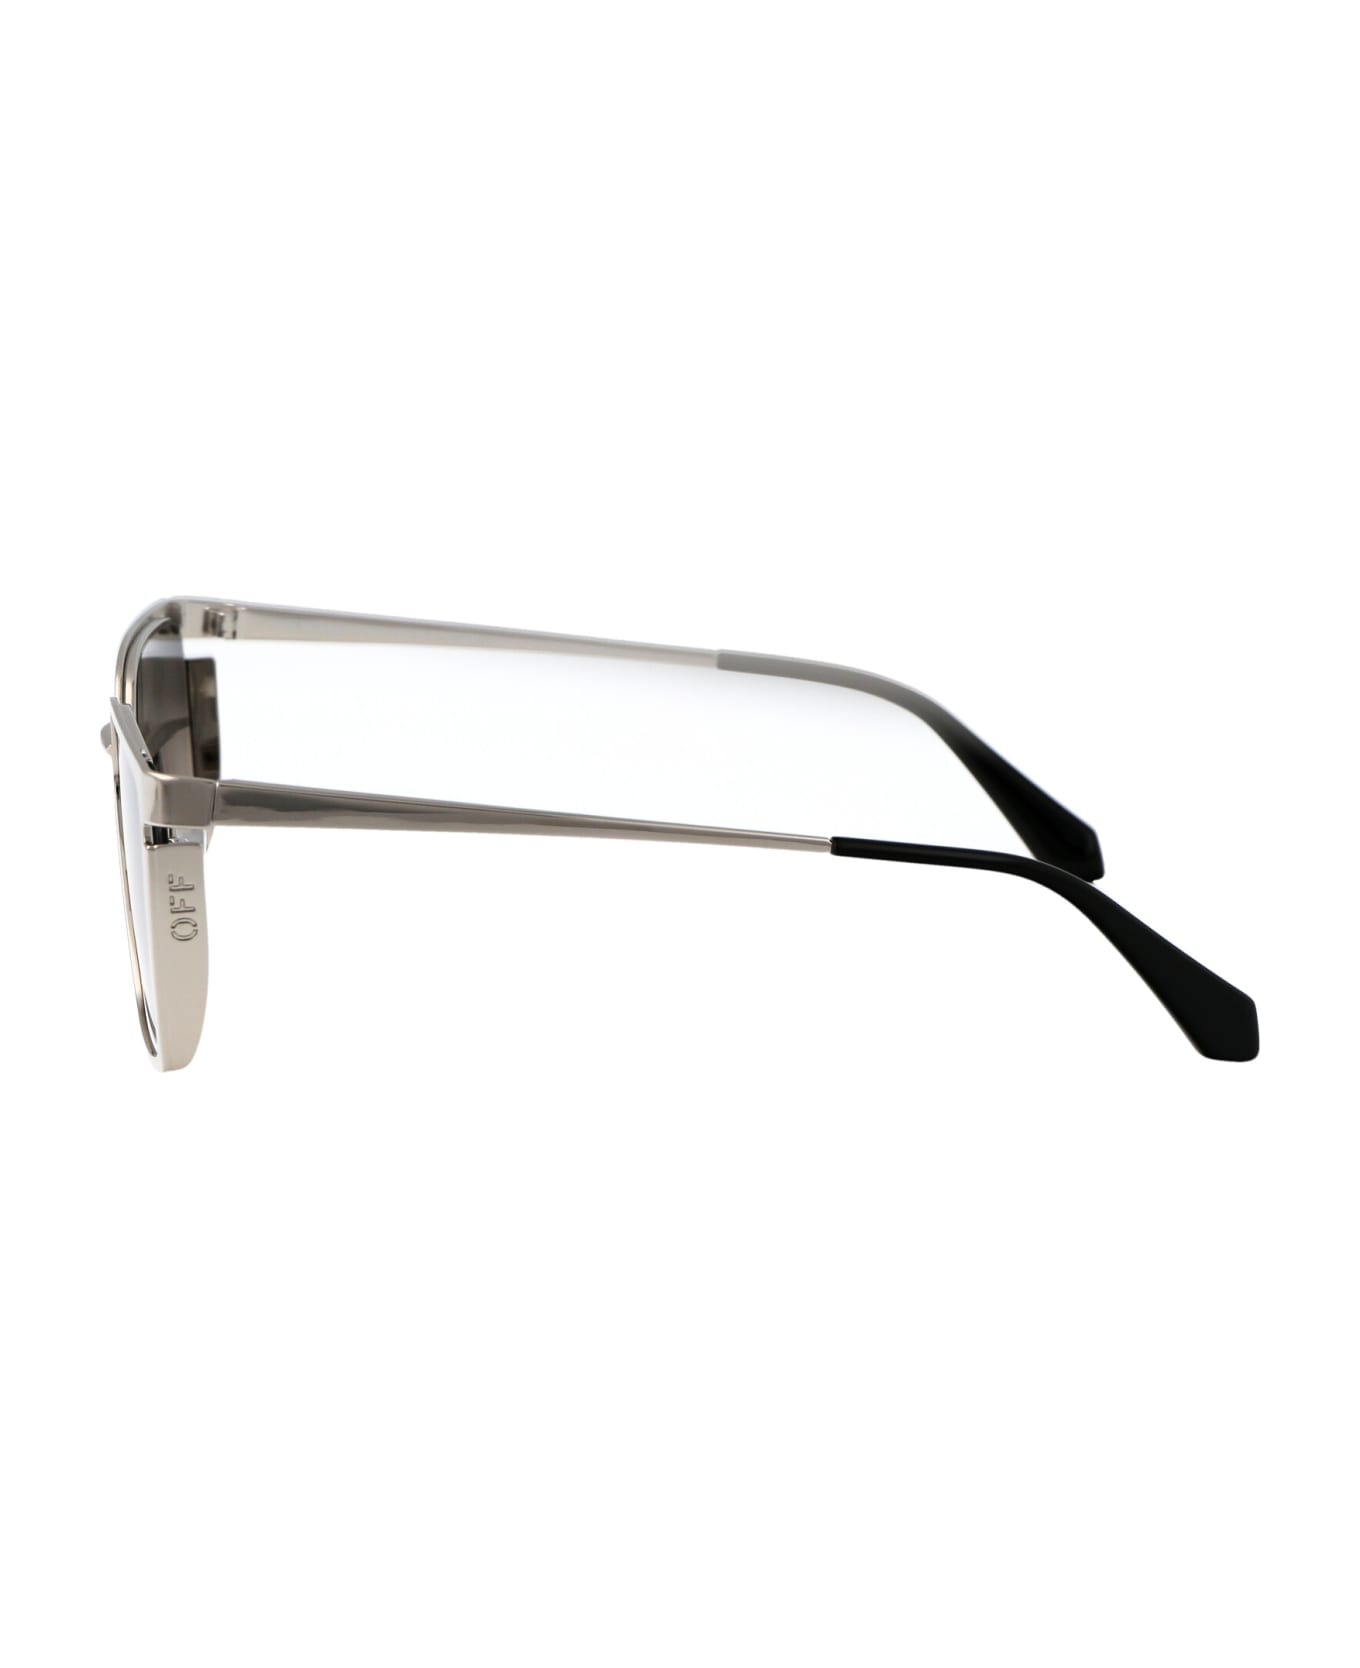 Off-White Yoder Sunglasses - 7207 SILVER